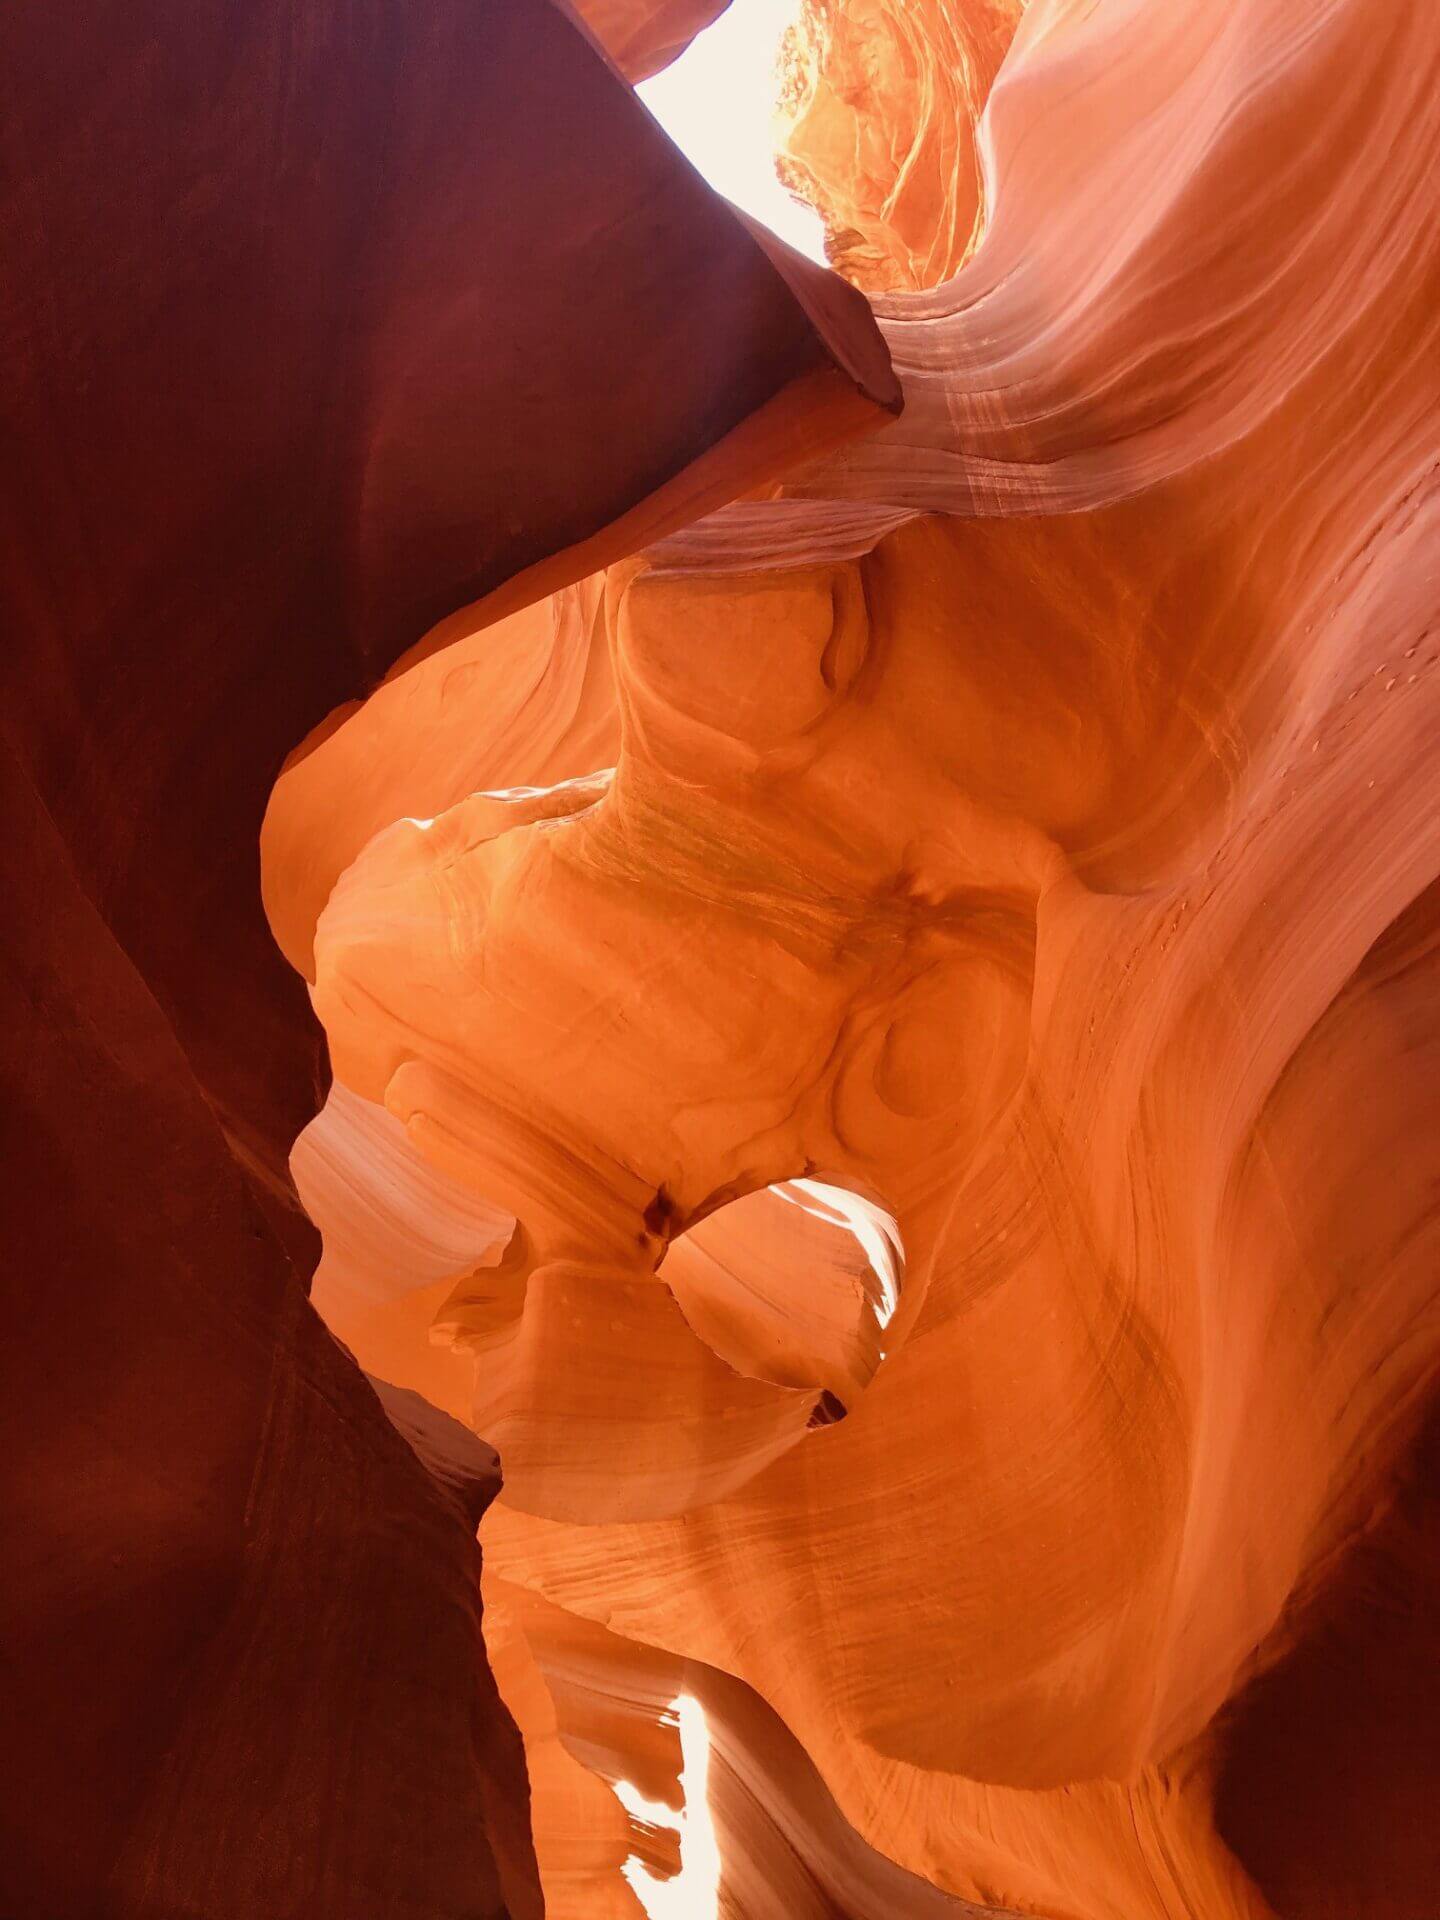 best time to visit lower antelope canyon